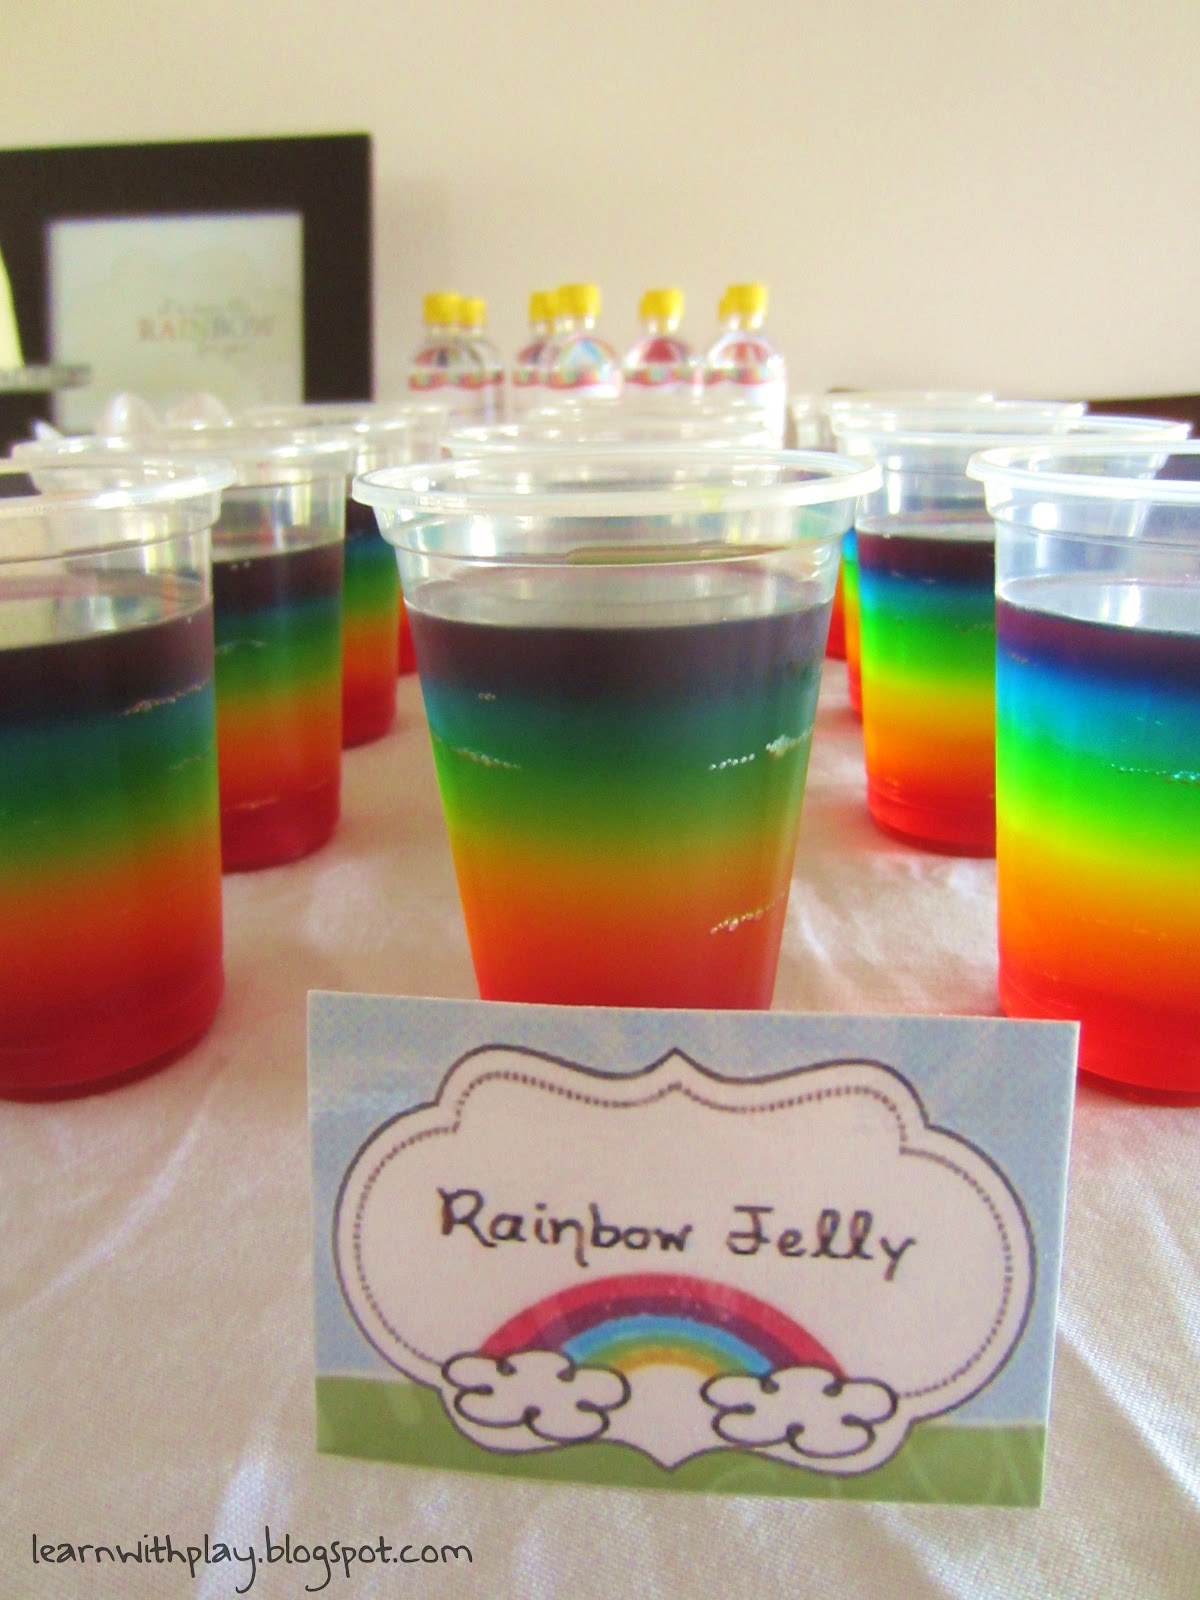 Learn with Play at Home: Rainbow Birthday Party Ideas